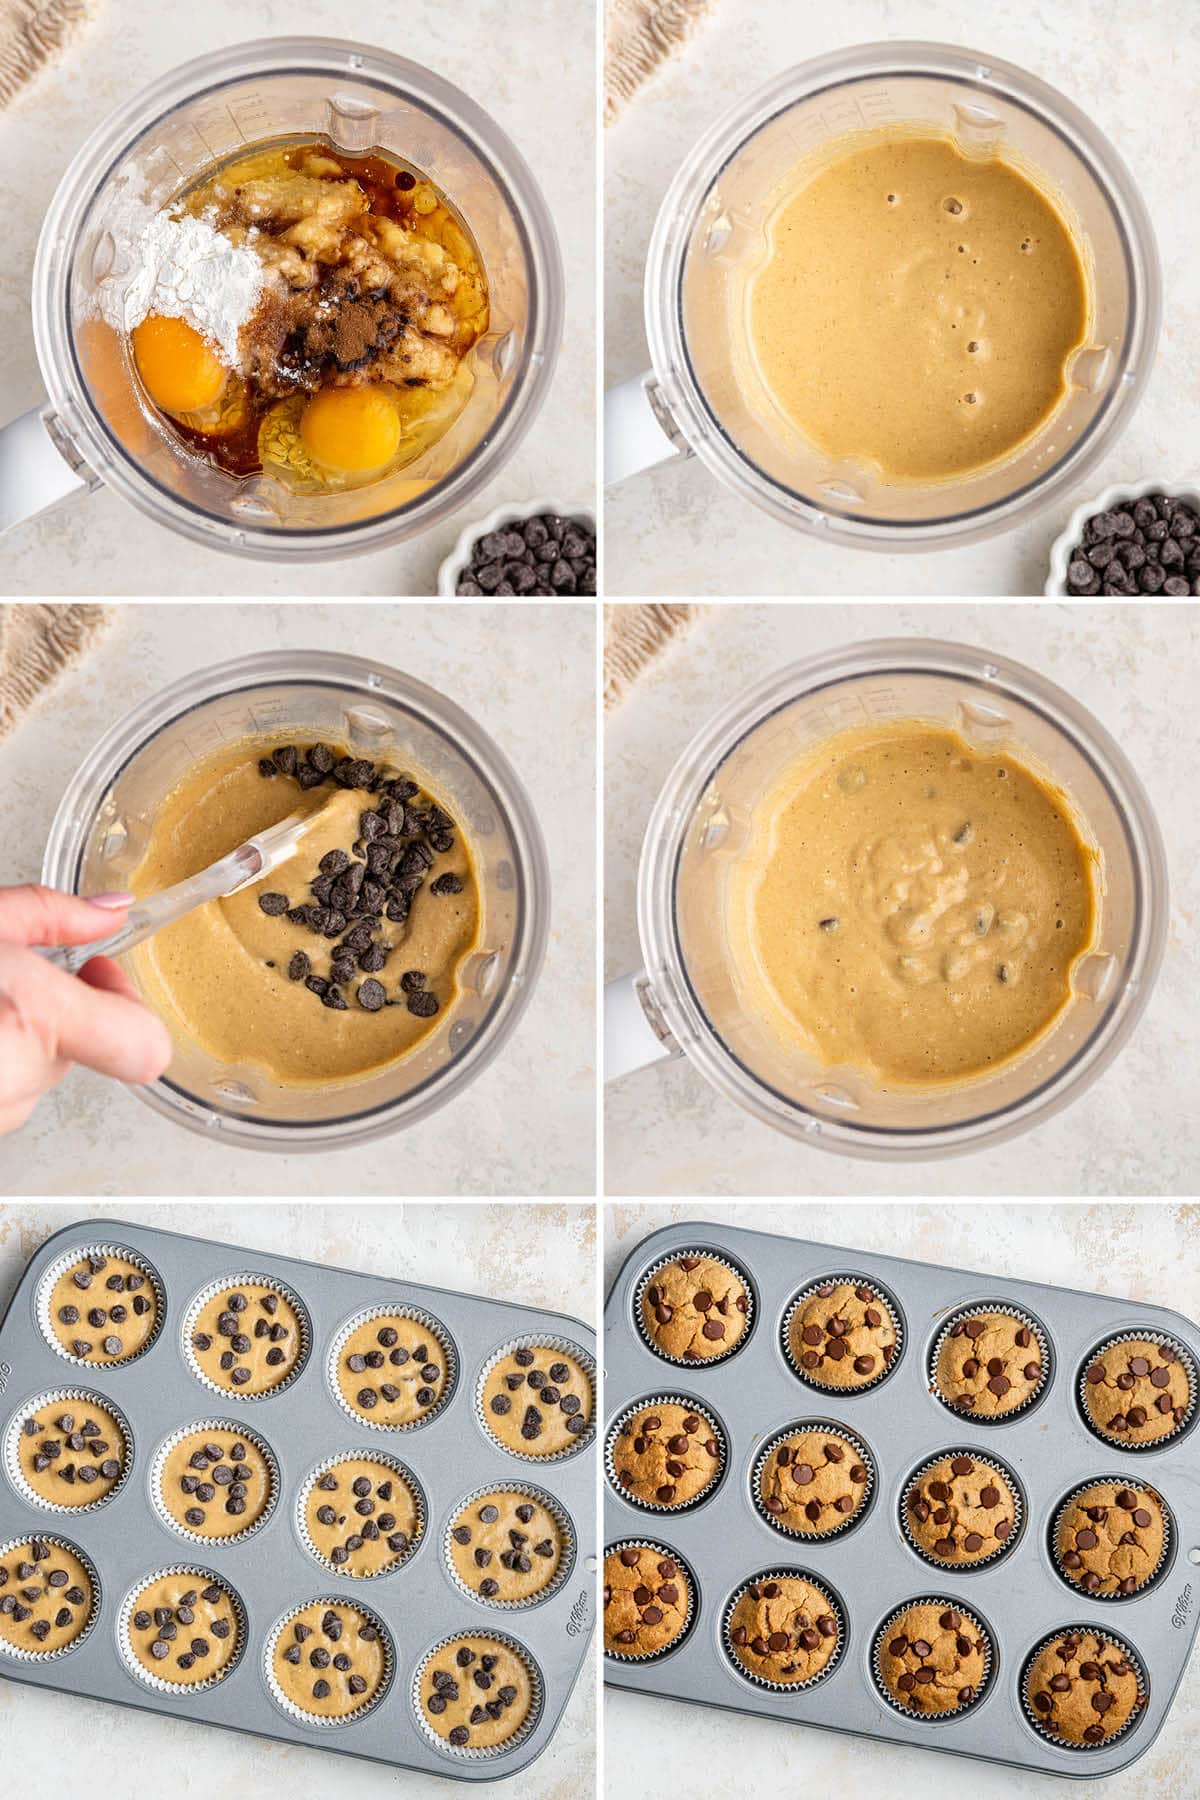 Collage of six photos showing the steps to make Banana Blender Muffins, from blending the batter in a blender to baking in a muffin tin.